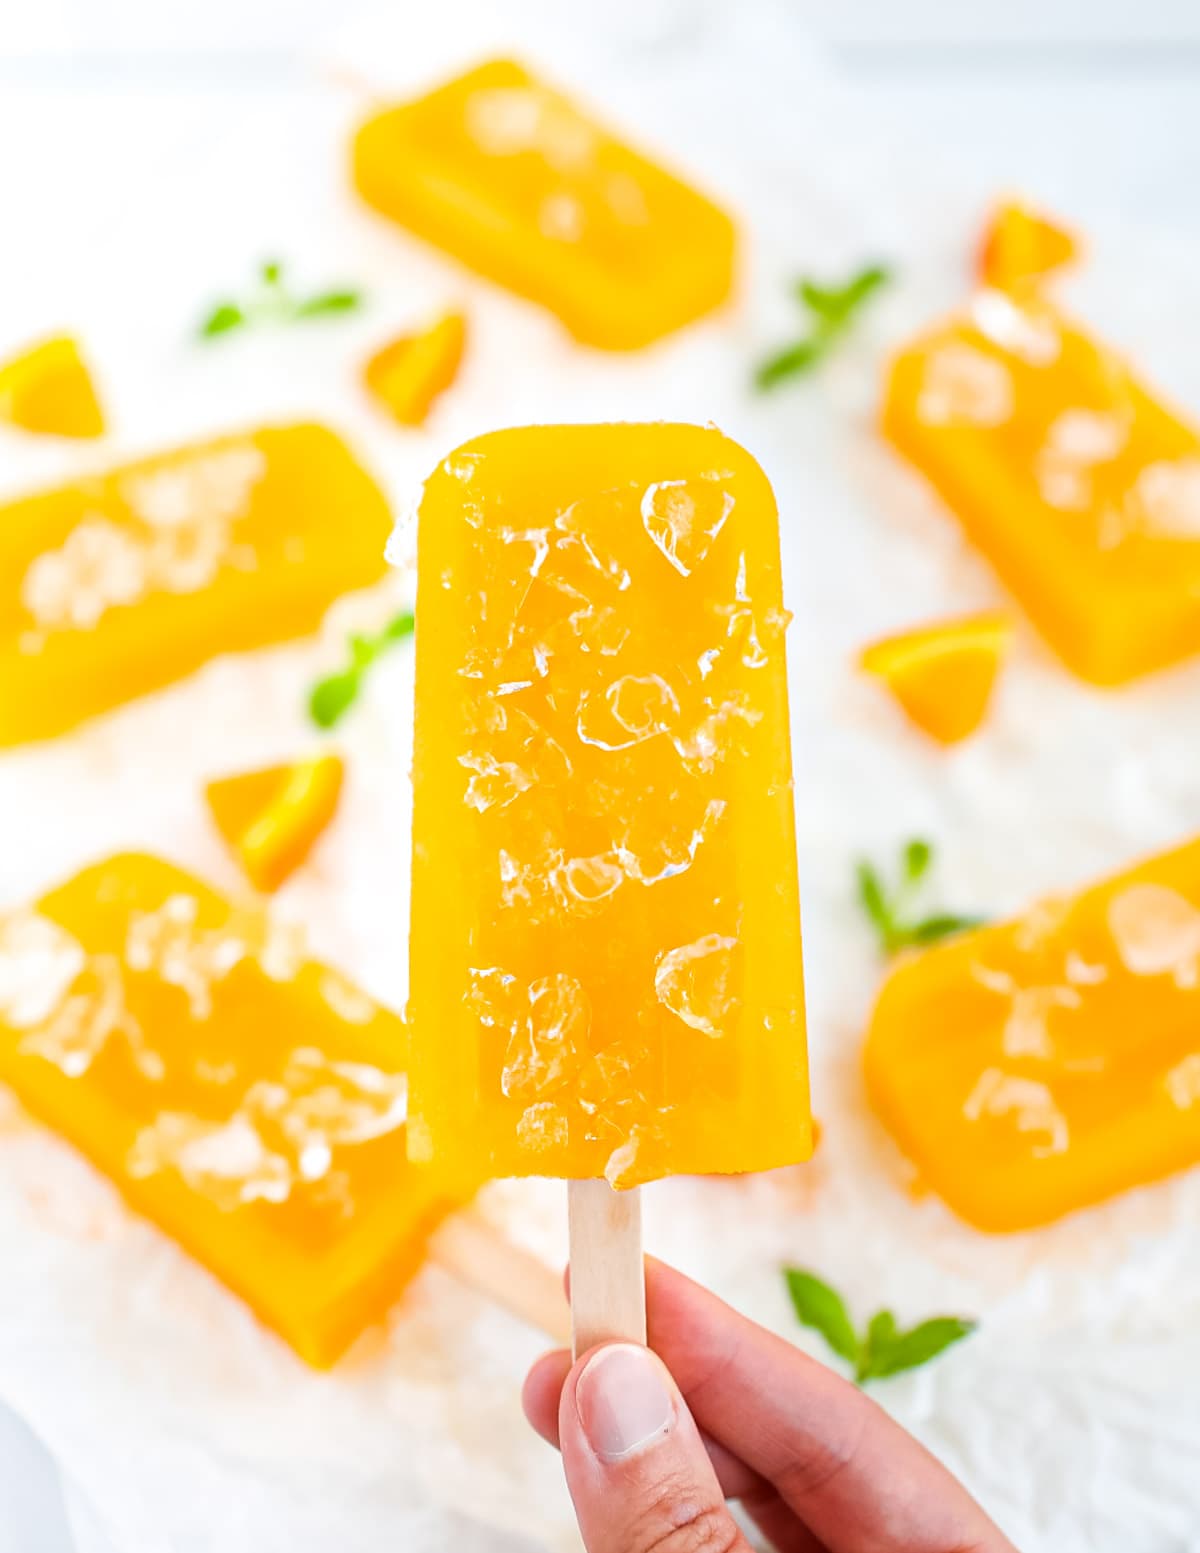 A hand holding up an orange-yellow ice pop that is covered in ice